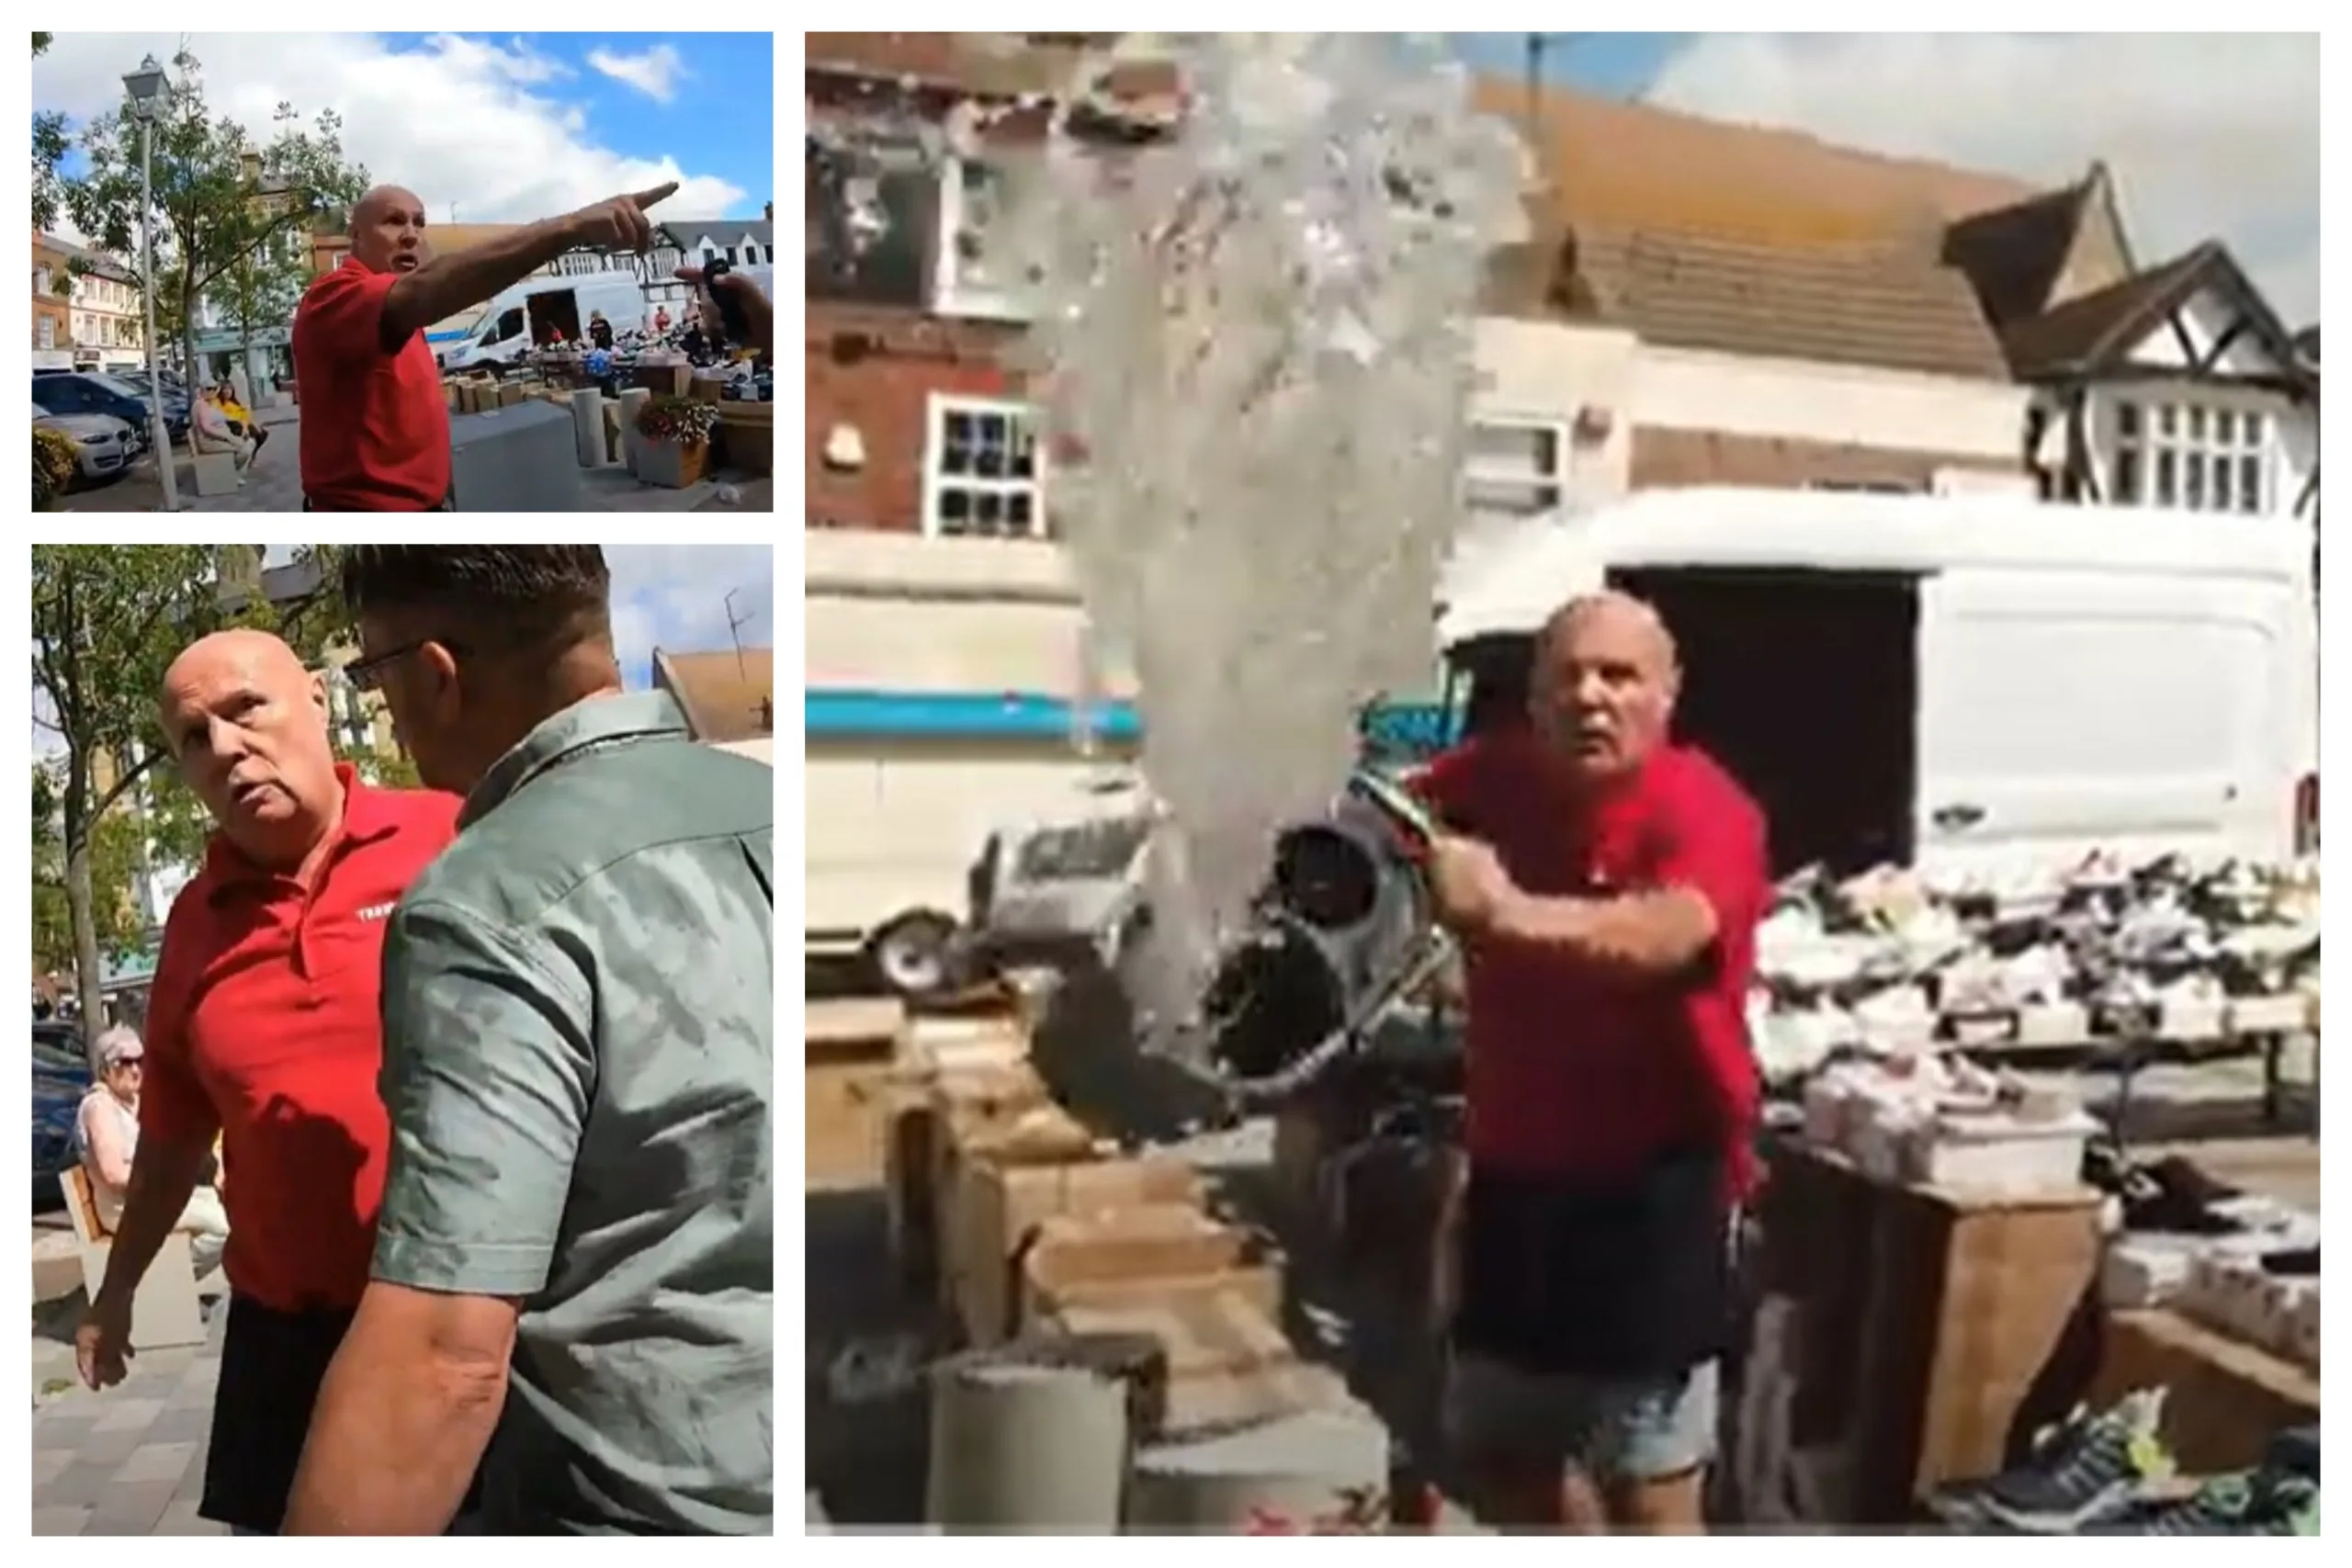 CAPTION This was the moment a stall holder lost his cool – and ‘cooled down’ a street preacher by throwing a bucket of water over him. Police have launched an inquiry.